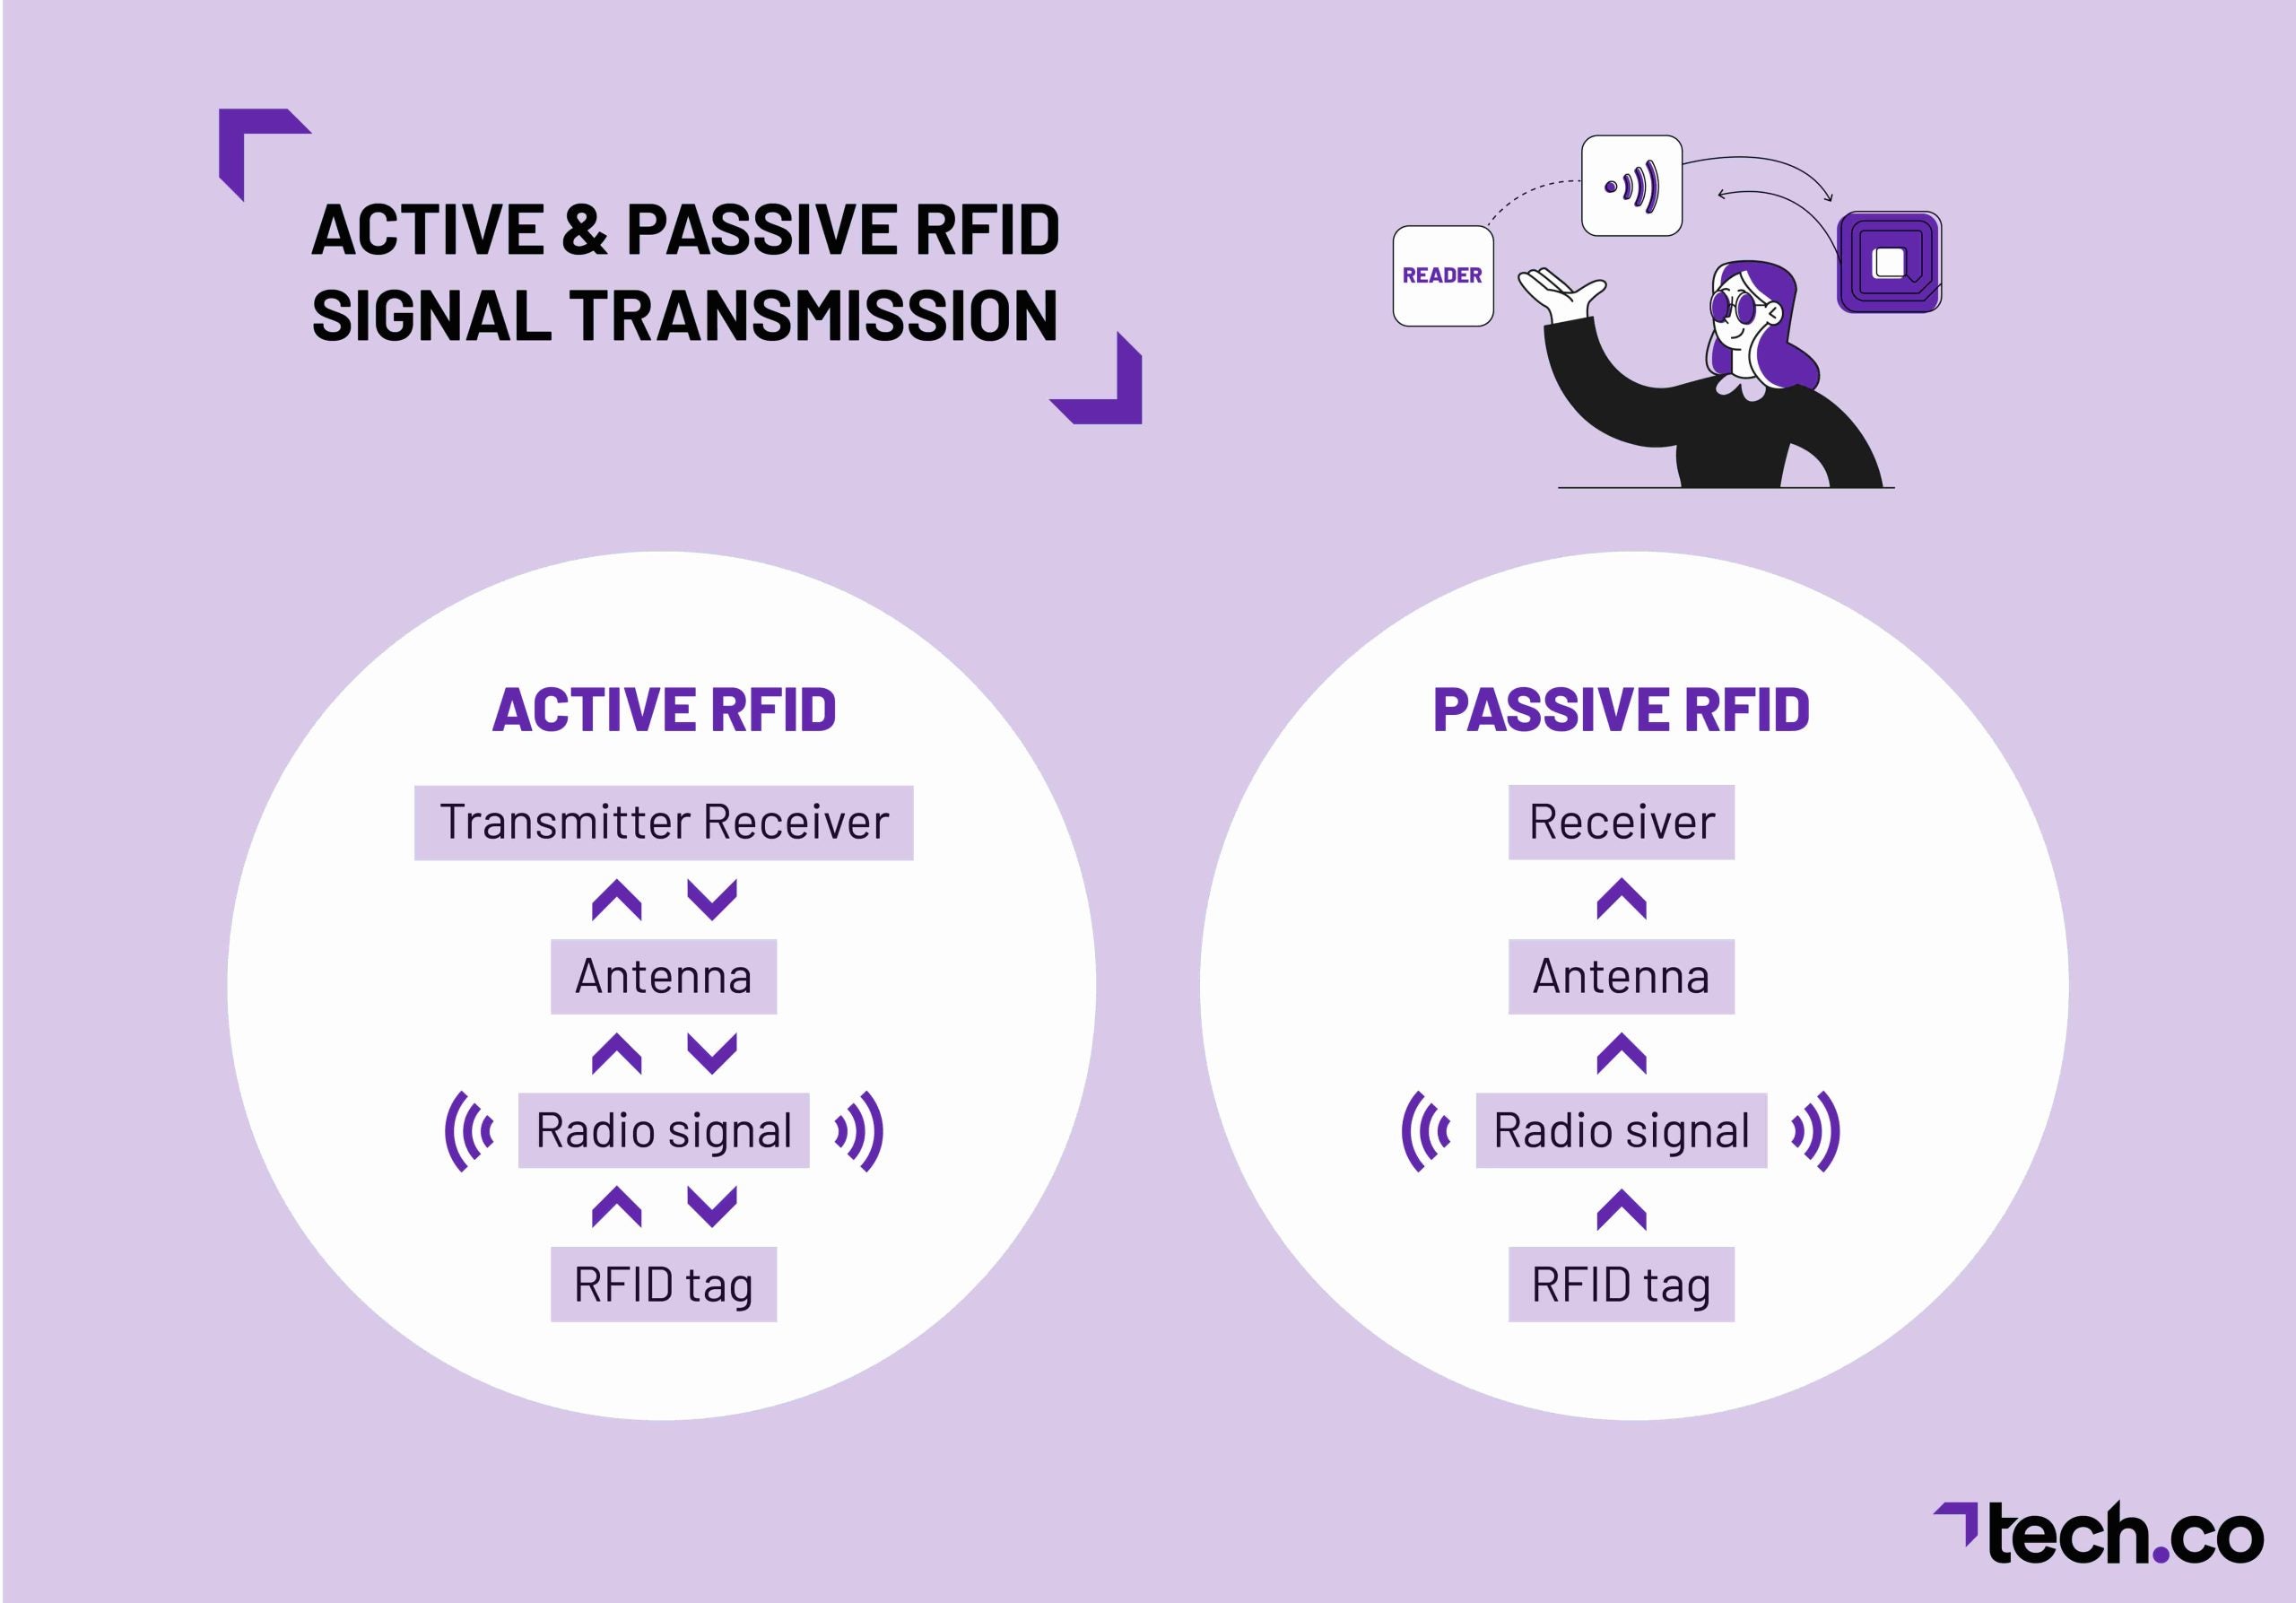 Active and passive RFID diagram